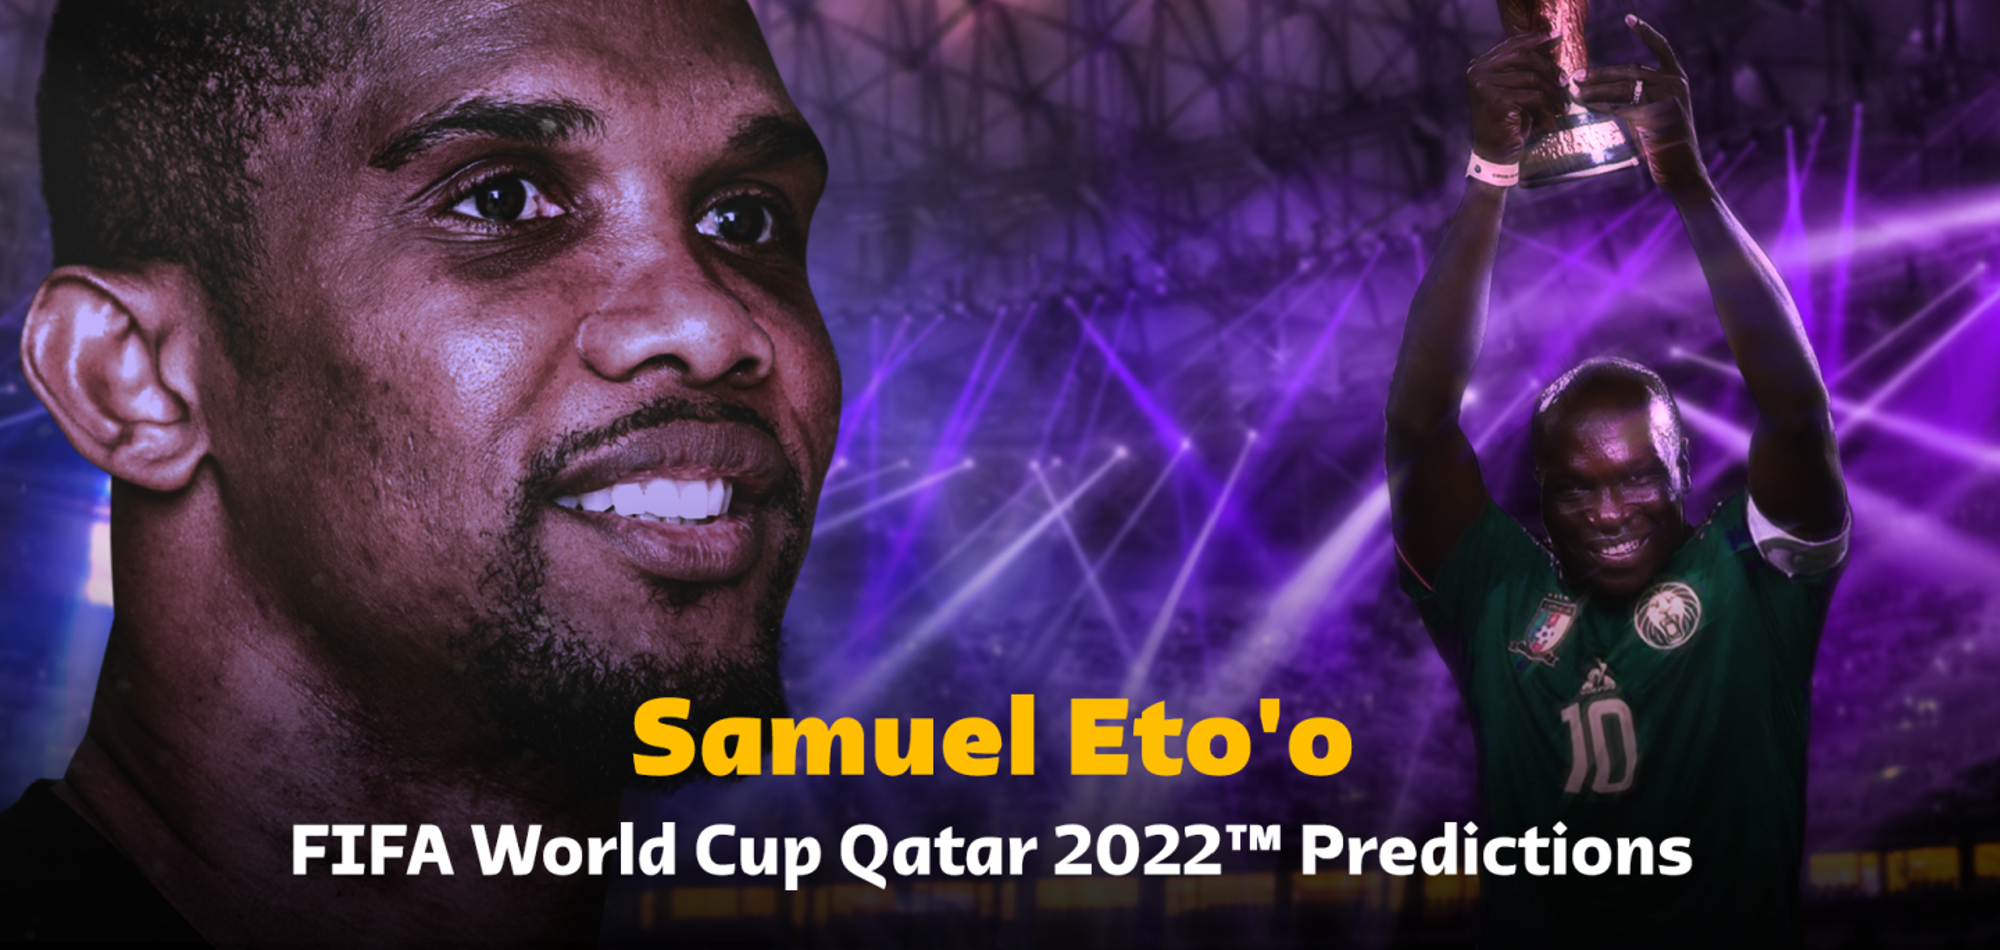 Samuel Eto’o: Cameroon will beat Morocco in this year’s World Cup final